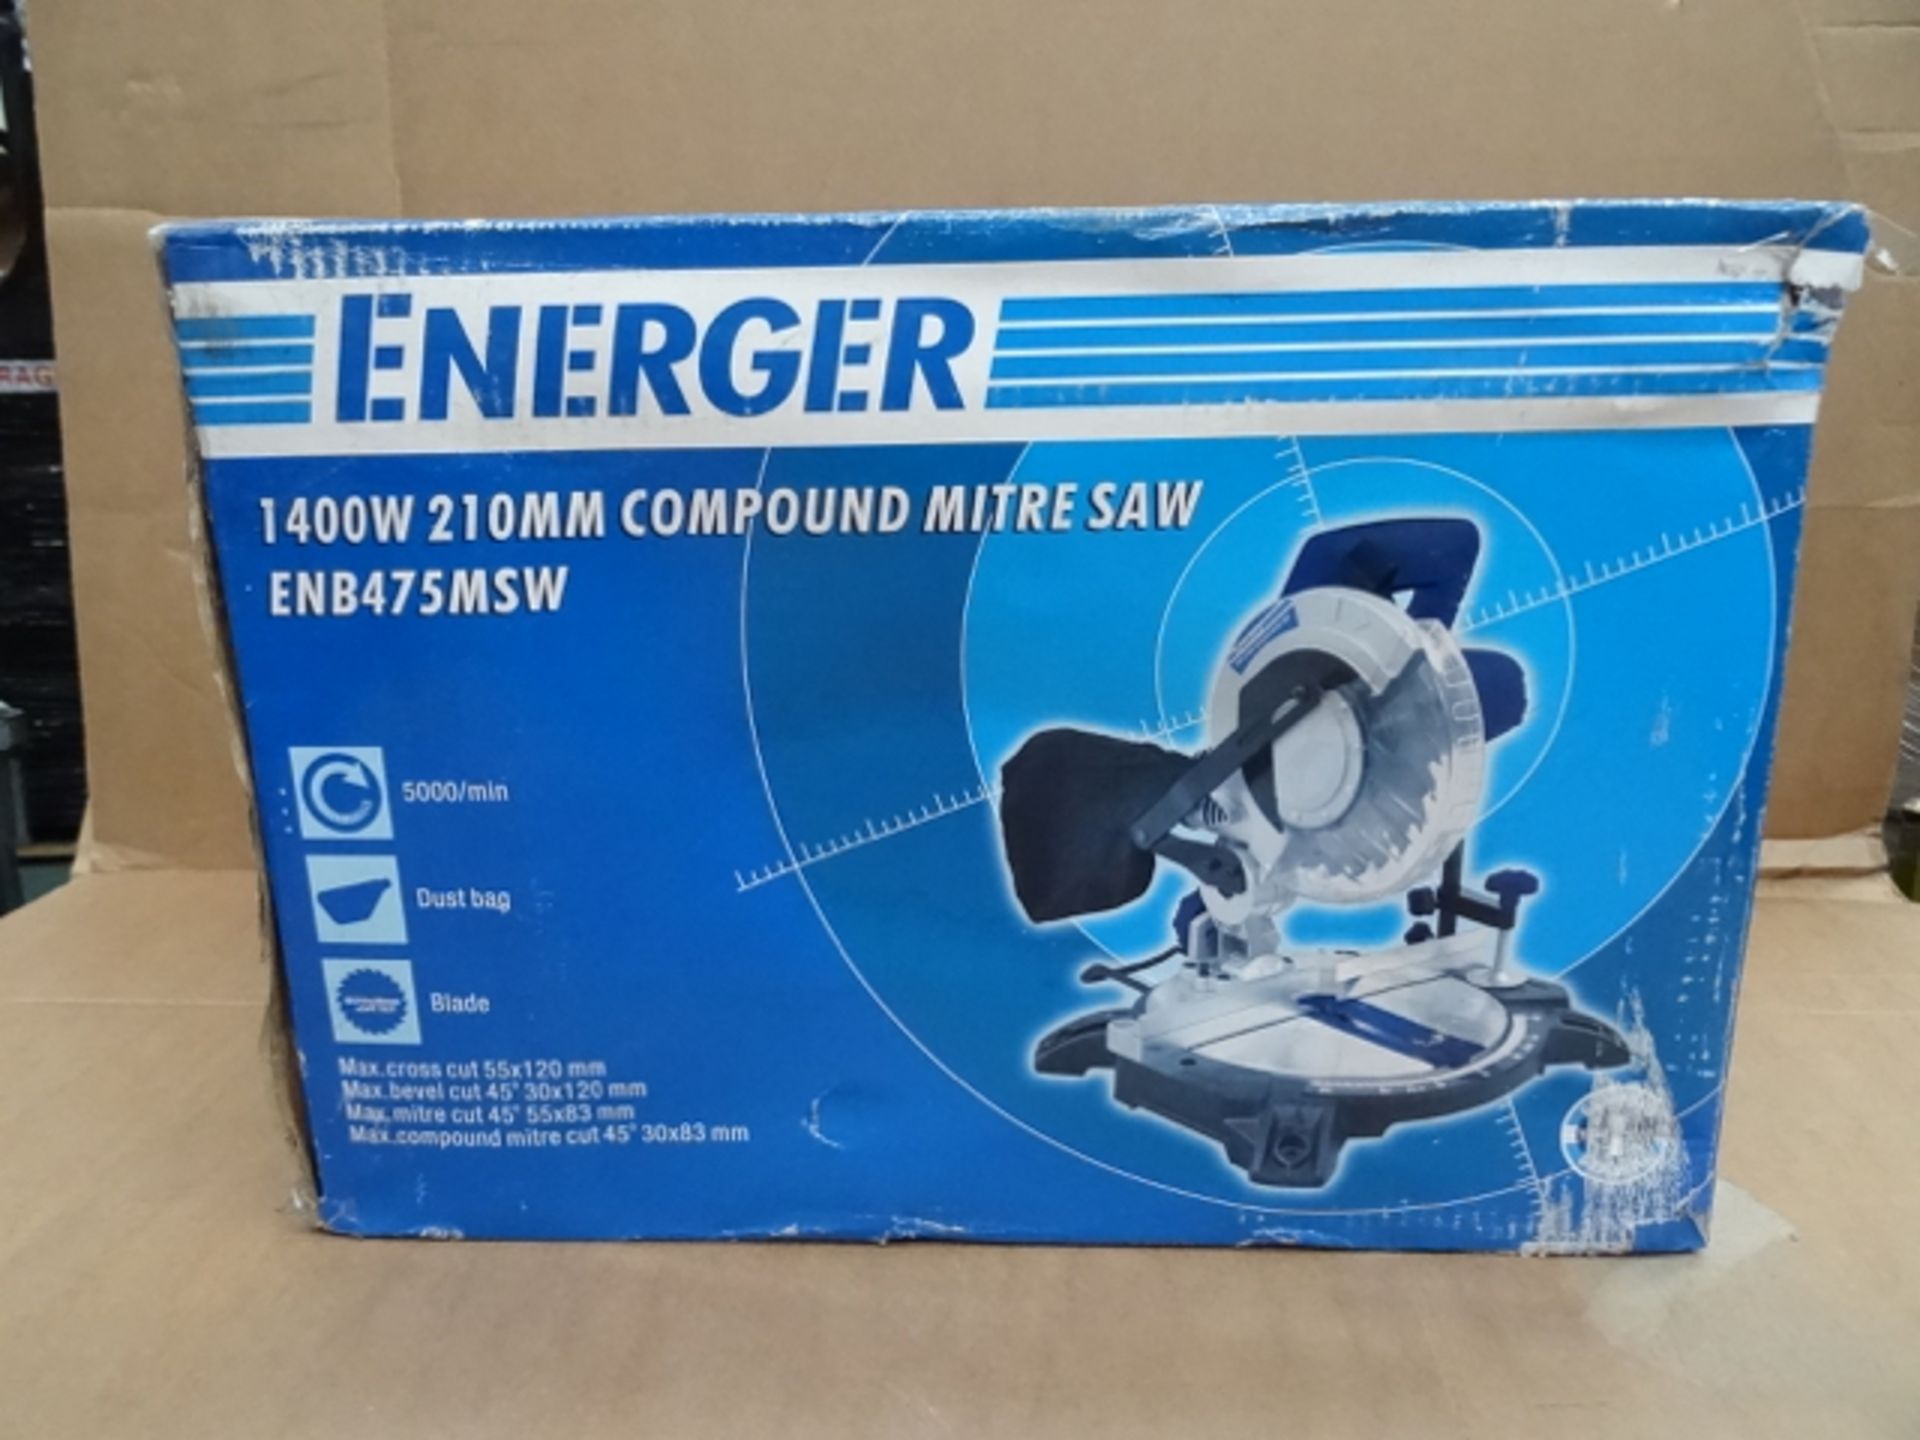 1 x Energer 1400W 210MM Compound Mitre Saw. Hardwearing wood saw with an aluminium and plastic base.